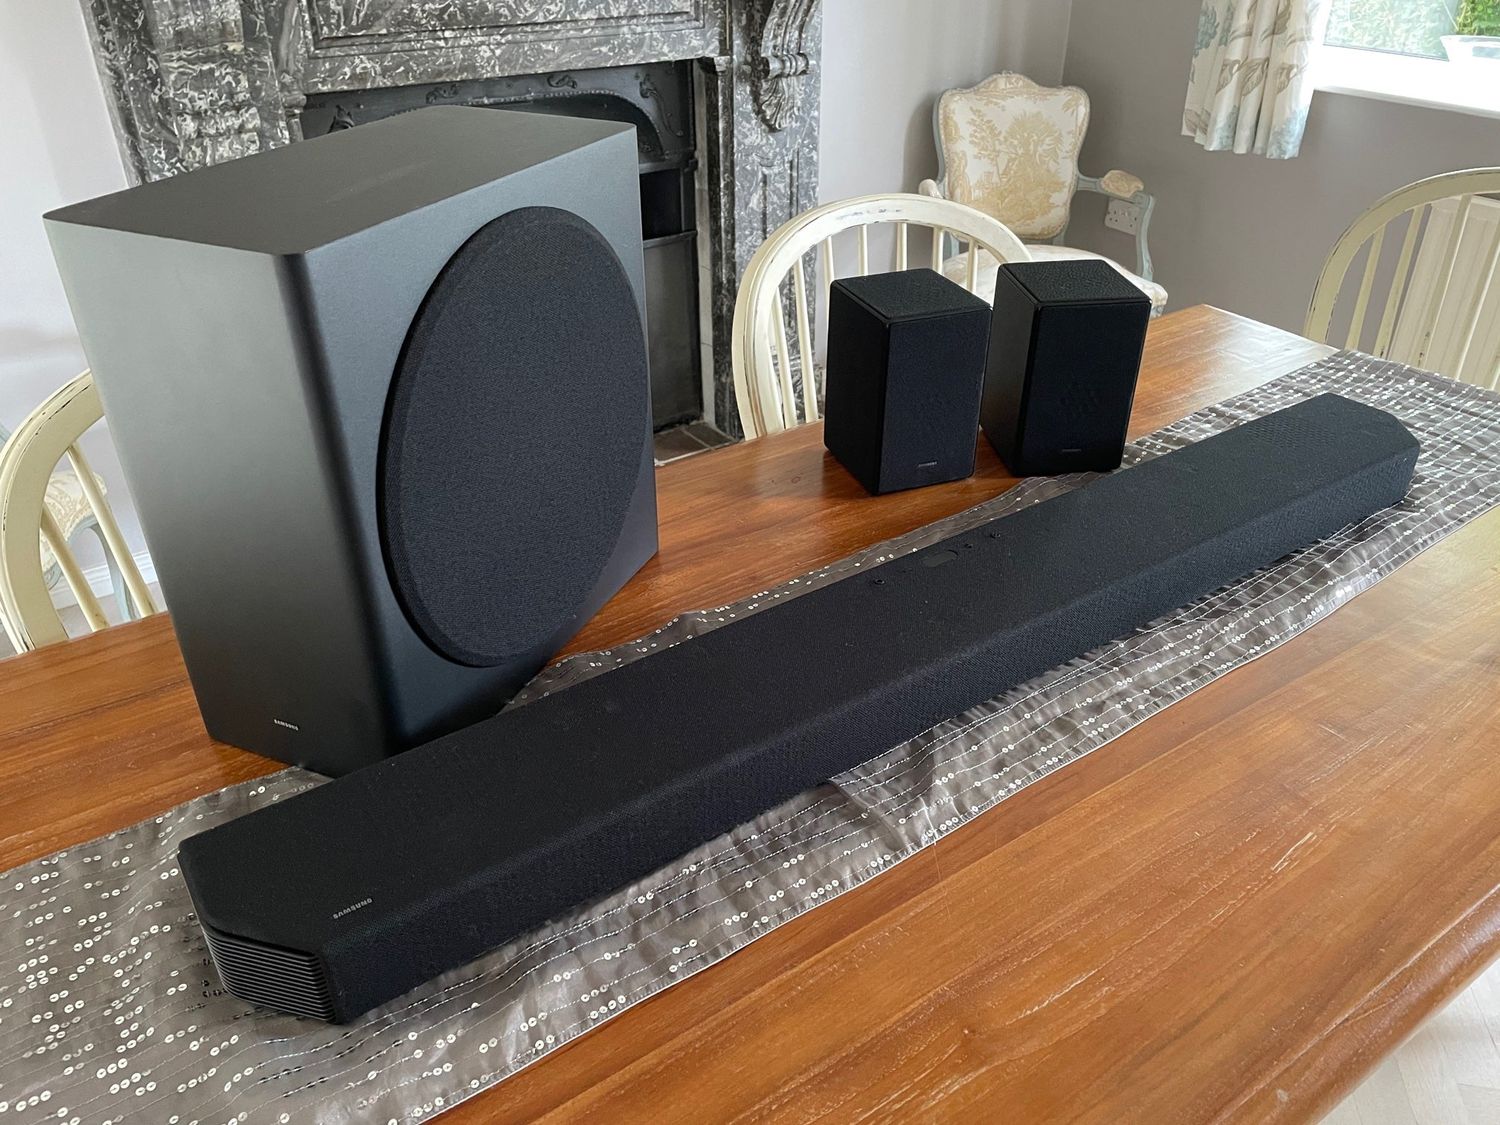 How To Connect Samsung Sound Bar To Wifi